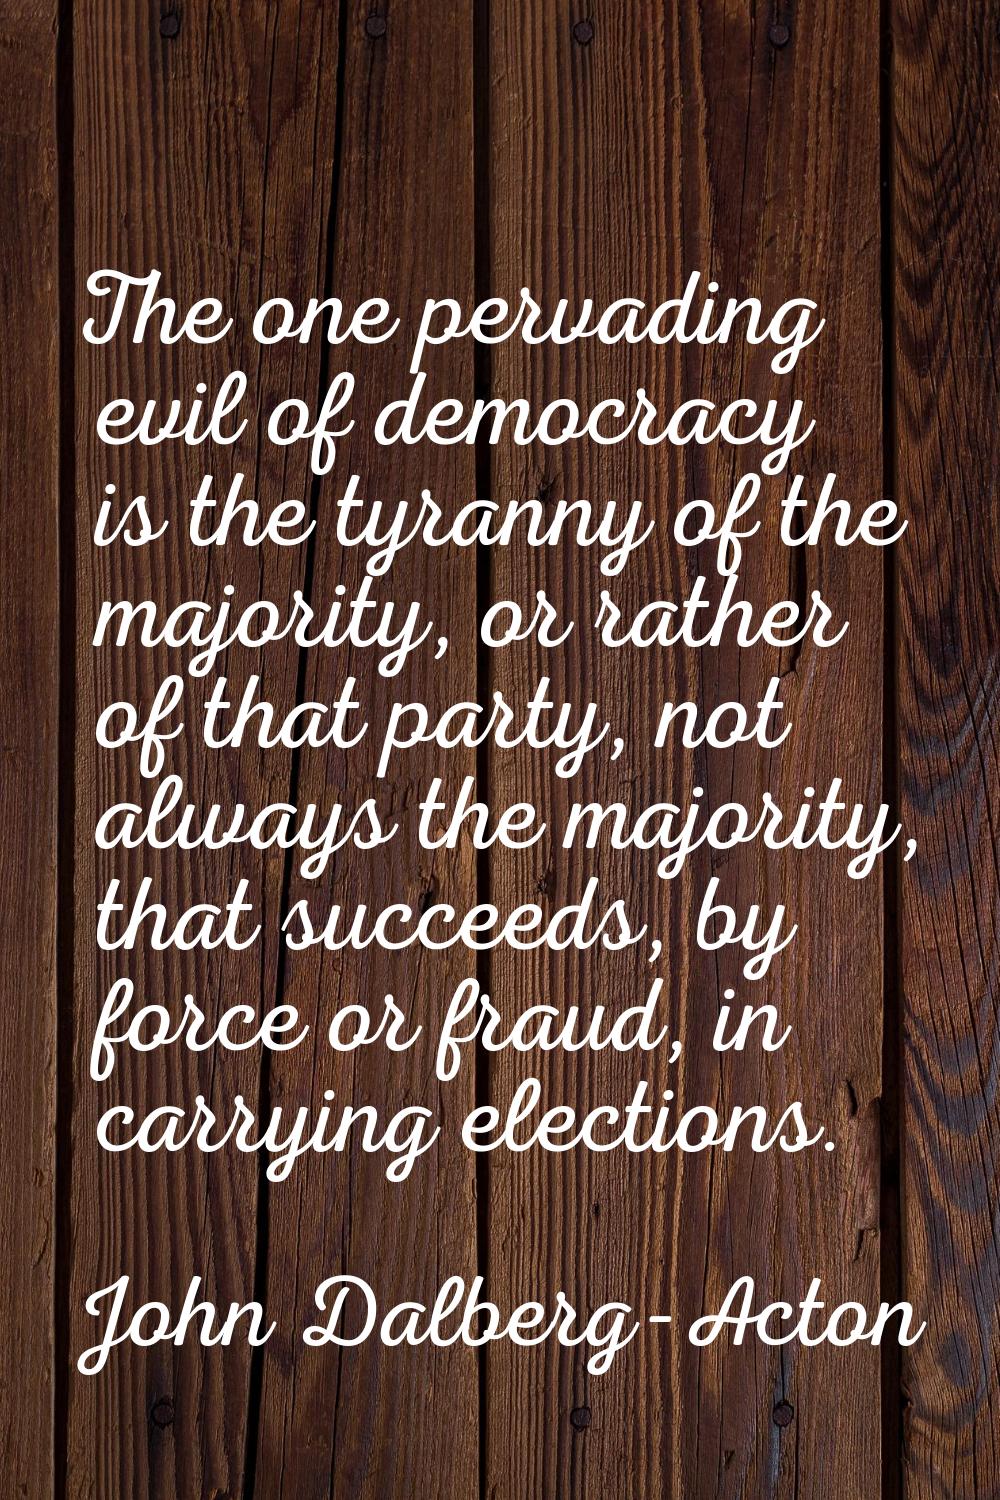 The one pervading evil of democracy is the tyranny of the majority, or rather of that party, not al